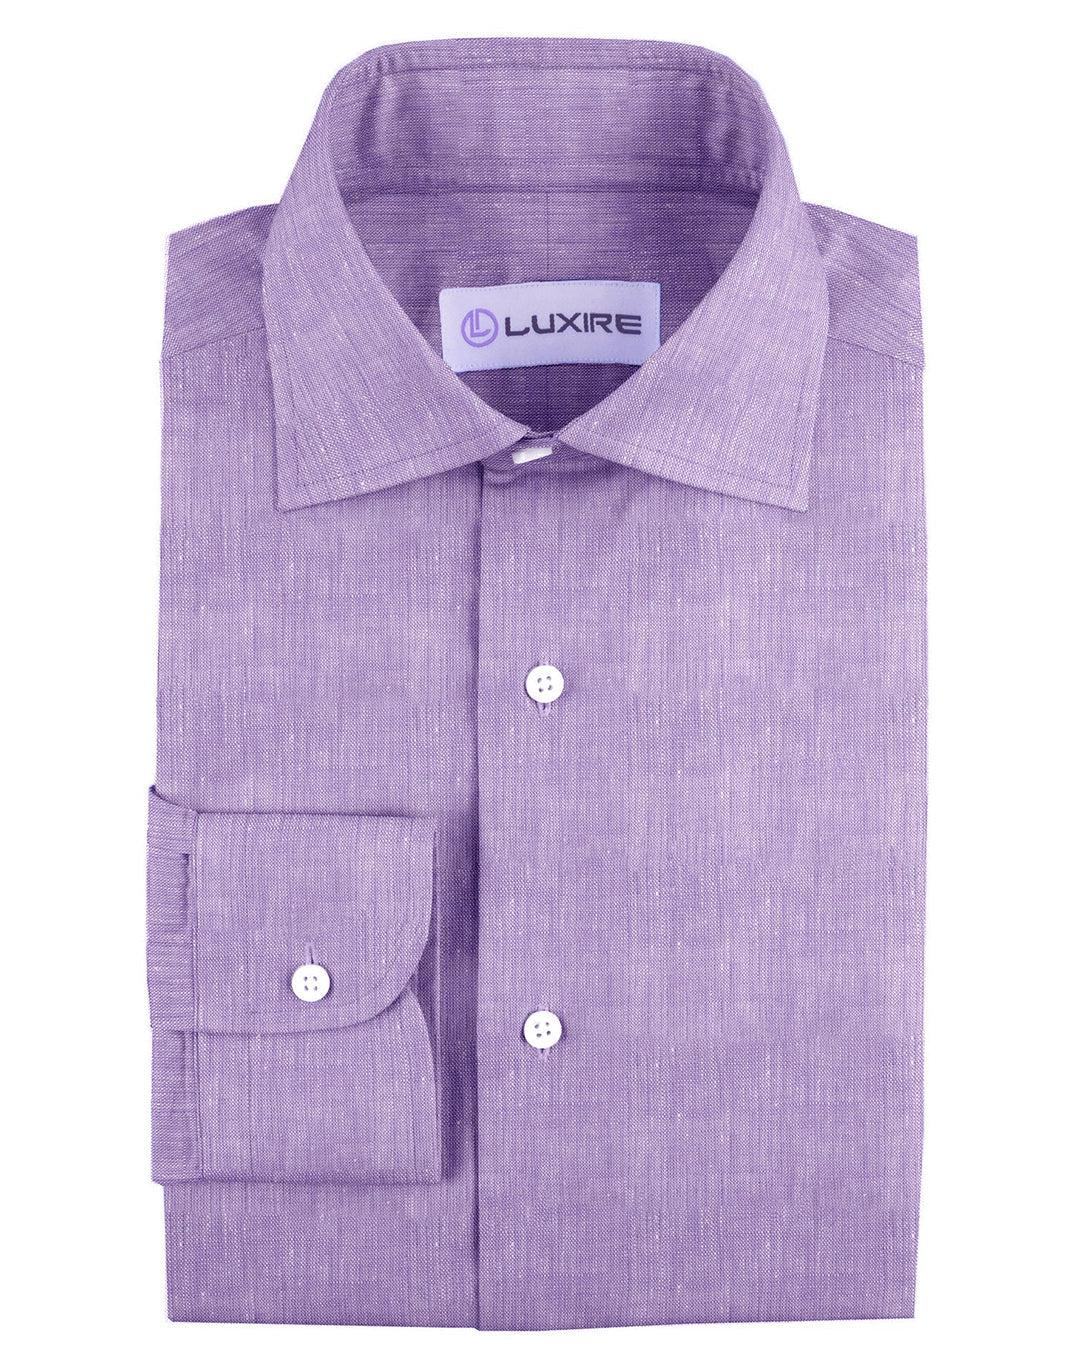 Front of the custom linen shirt for men in purple chambray by Luxire Clothing